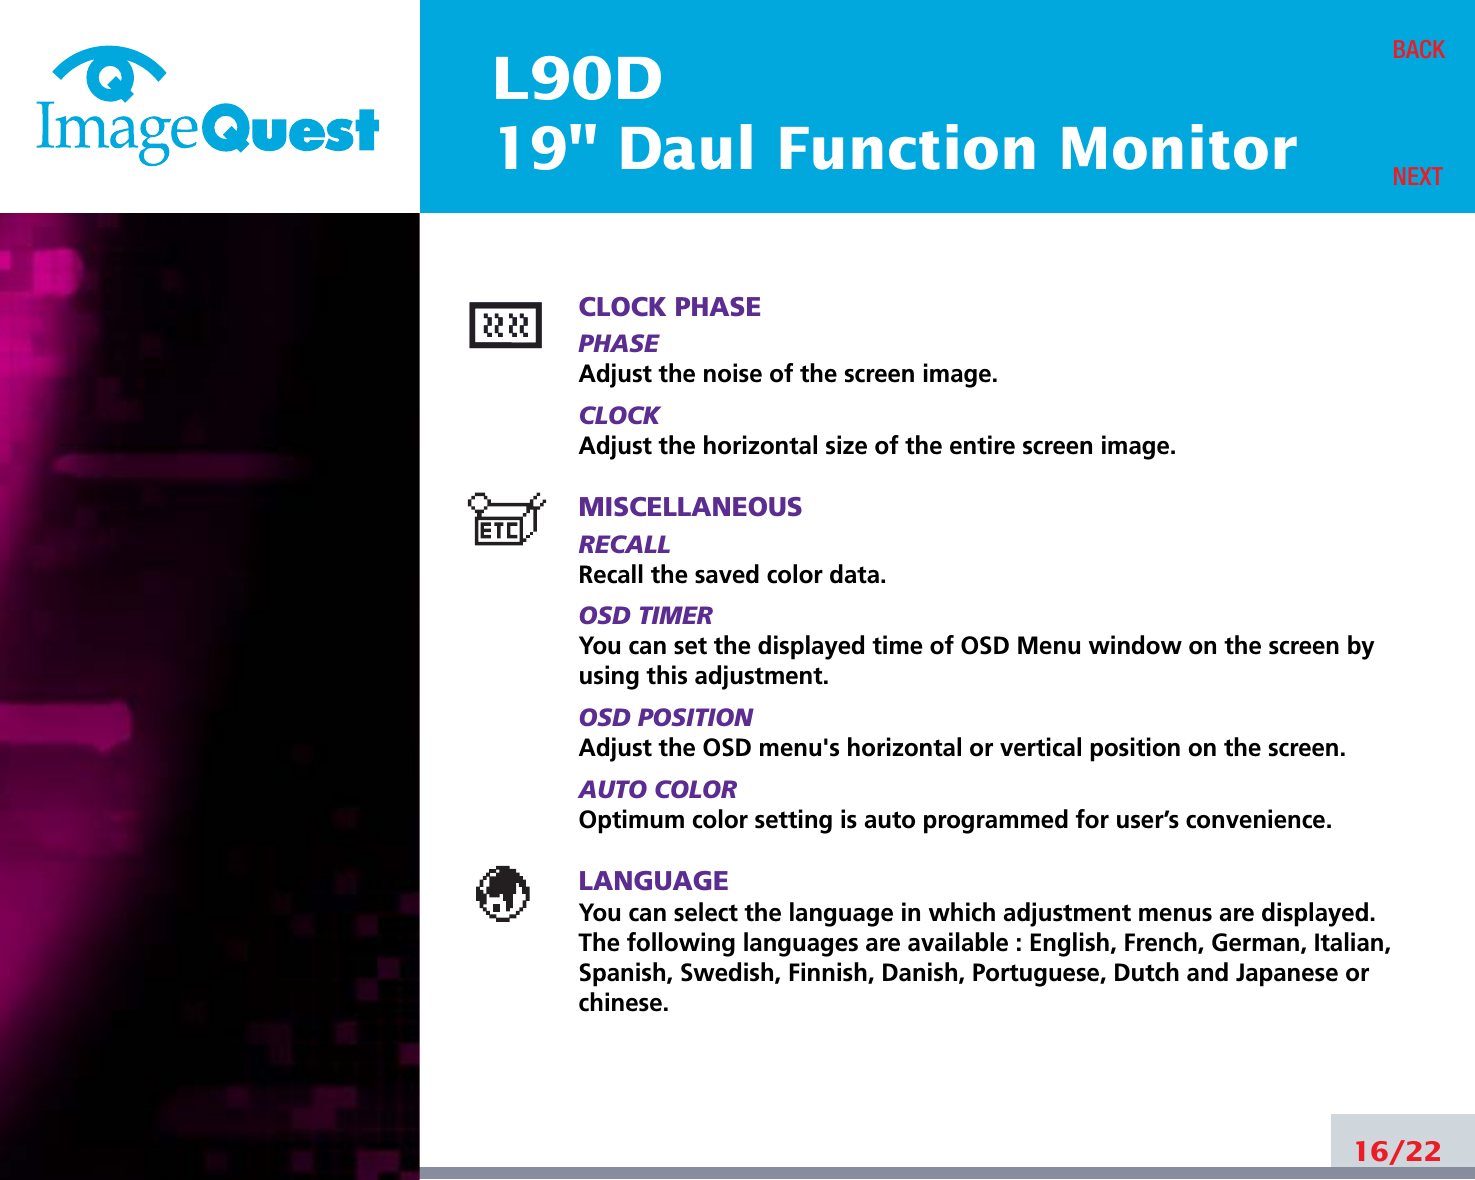 L90D19&quot; Daul Function Monitor16/22BACKNEXTCLOCK PHASEPHASEAdjust the noise of the screen image.CLOCKAdjust the horizontal size of the entire screen image.MISCELLANEOUSRECALL Recall the saved color data.OSD TIMERYou can set the displayed time of OSD Menu window on the screen byusing this adjustment.OSD POSITIONAdjust the OSD menu&apos;s horizontal or vertical position on the screen.AUTO COLOROptimum color setting is auto programmed for user’s convenience.LANGUAGEYou can select the language in which adjustment menus are displayed. The following languages are available : English, French, German, Italian,Spanish, Swedish, Finnish, Danish, Portuguese, Dutch and Japanese orchinese.